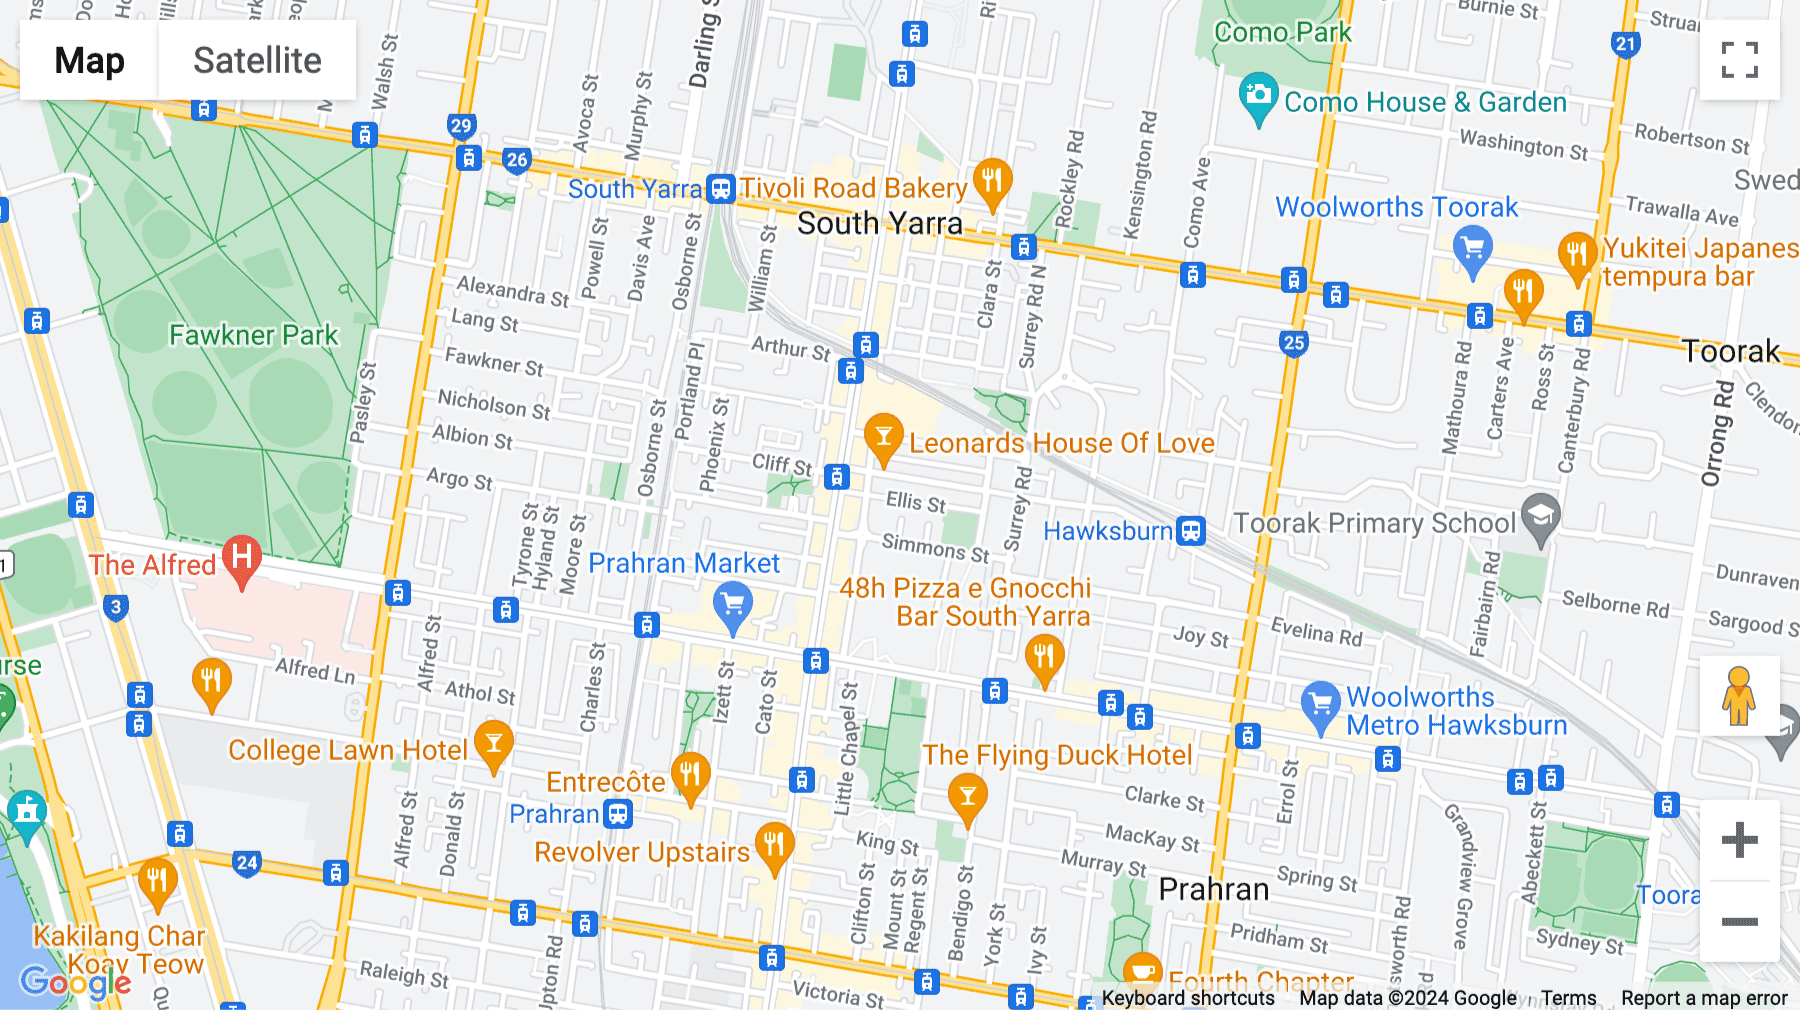 Click for interative map of 14 Ellis Street, South Yarra, Melbourne